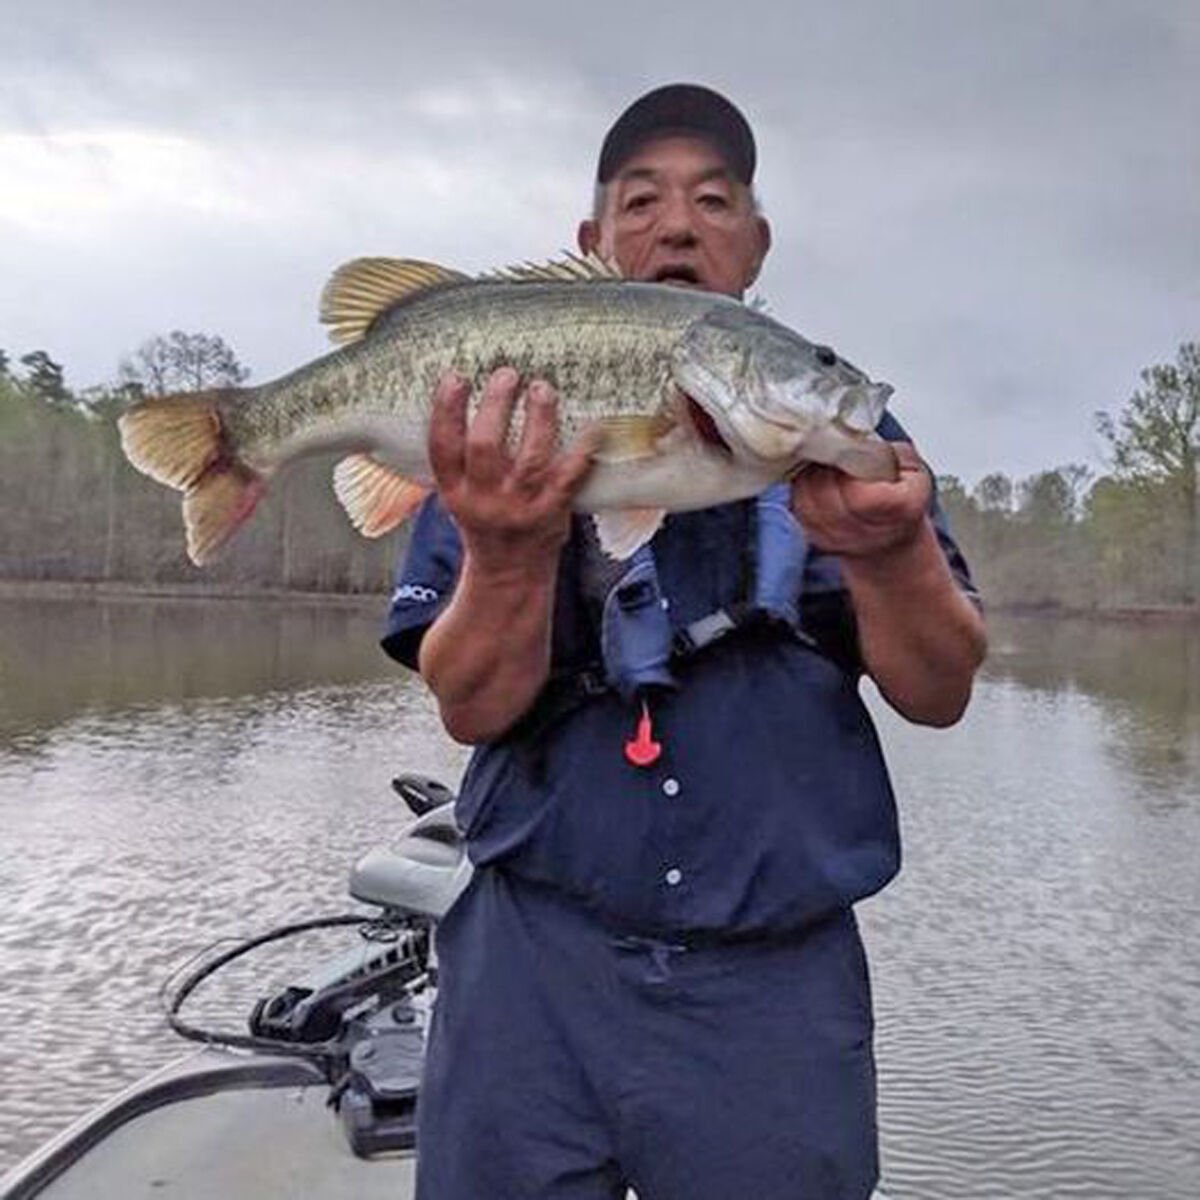 Dauphinet doesn't have to go far to get 10.79-pound bass to bite fav